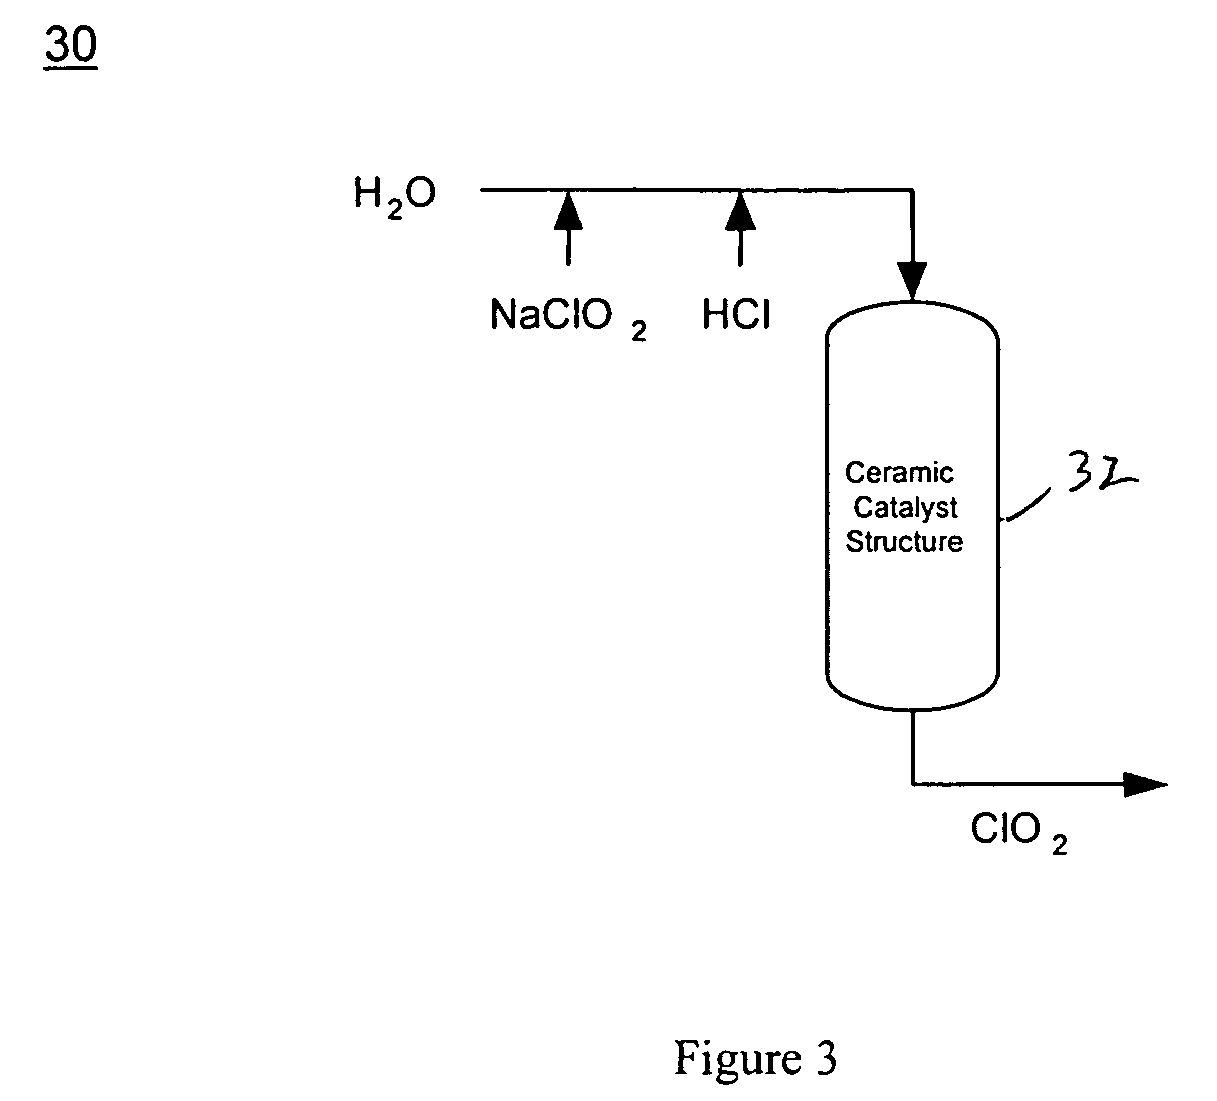 Processes for producing an aqueous solution containing chlorine dioxide